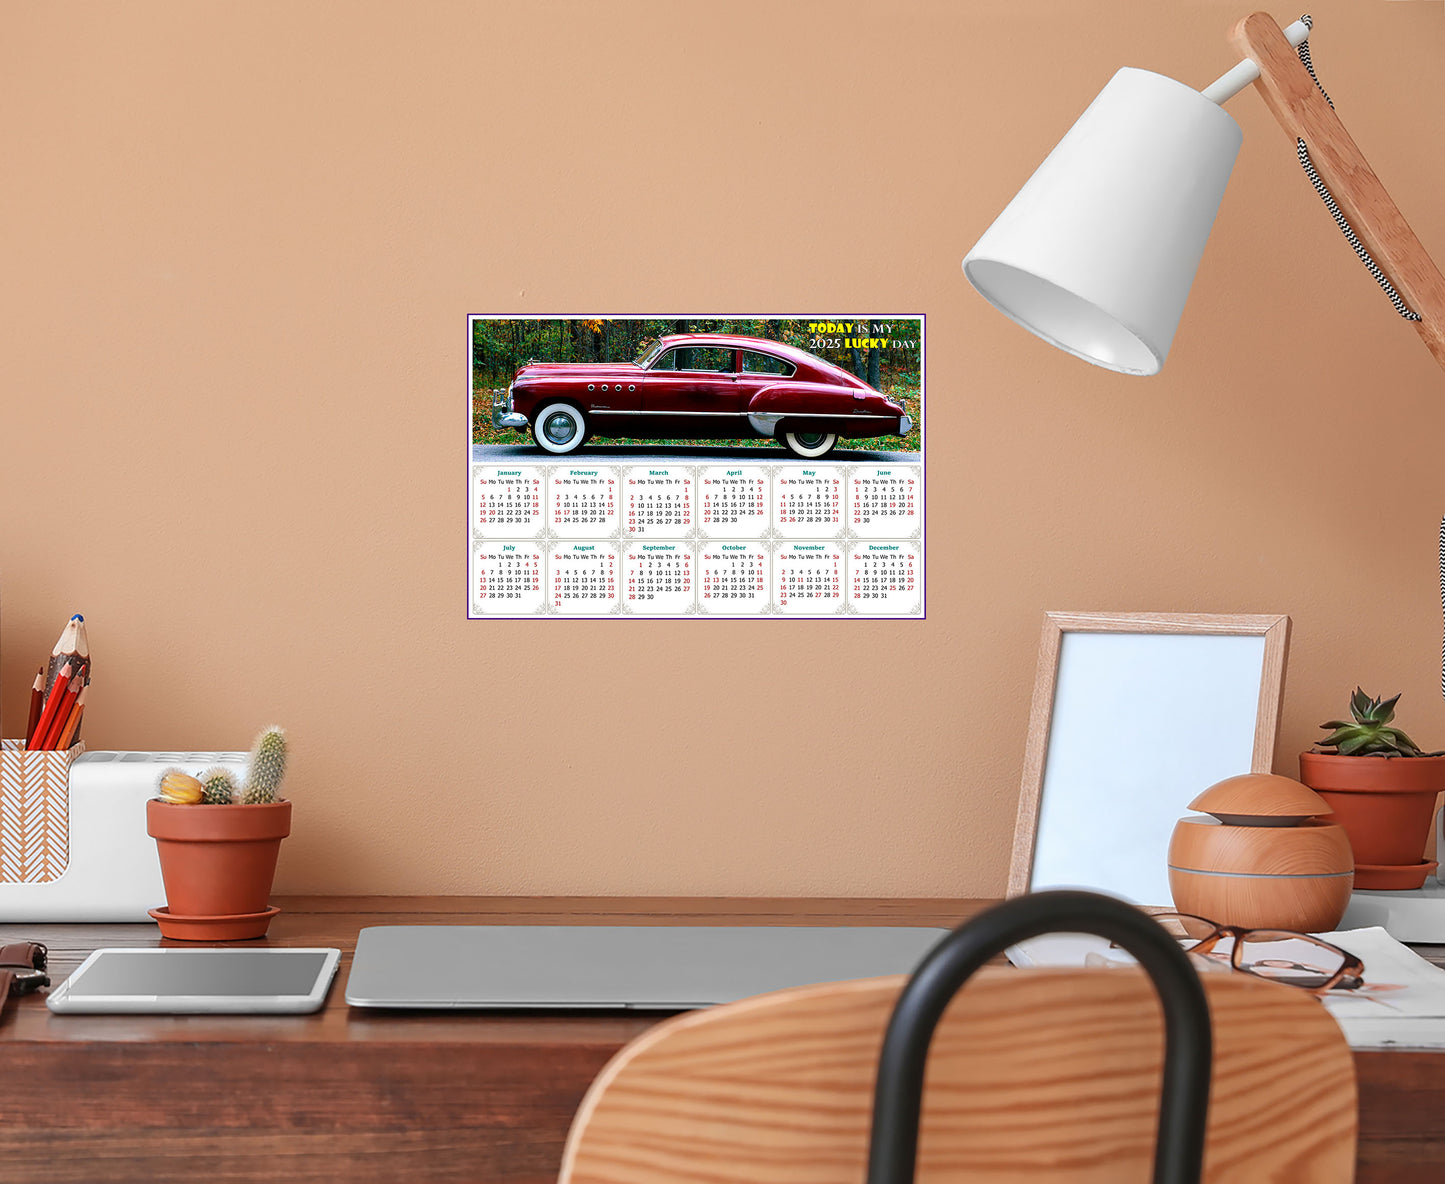 2025 Peel & Stick Calendar - Today is my Lucky Day - Removable, Repositionable - 047 (9"x 6")